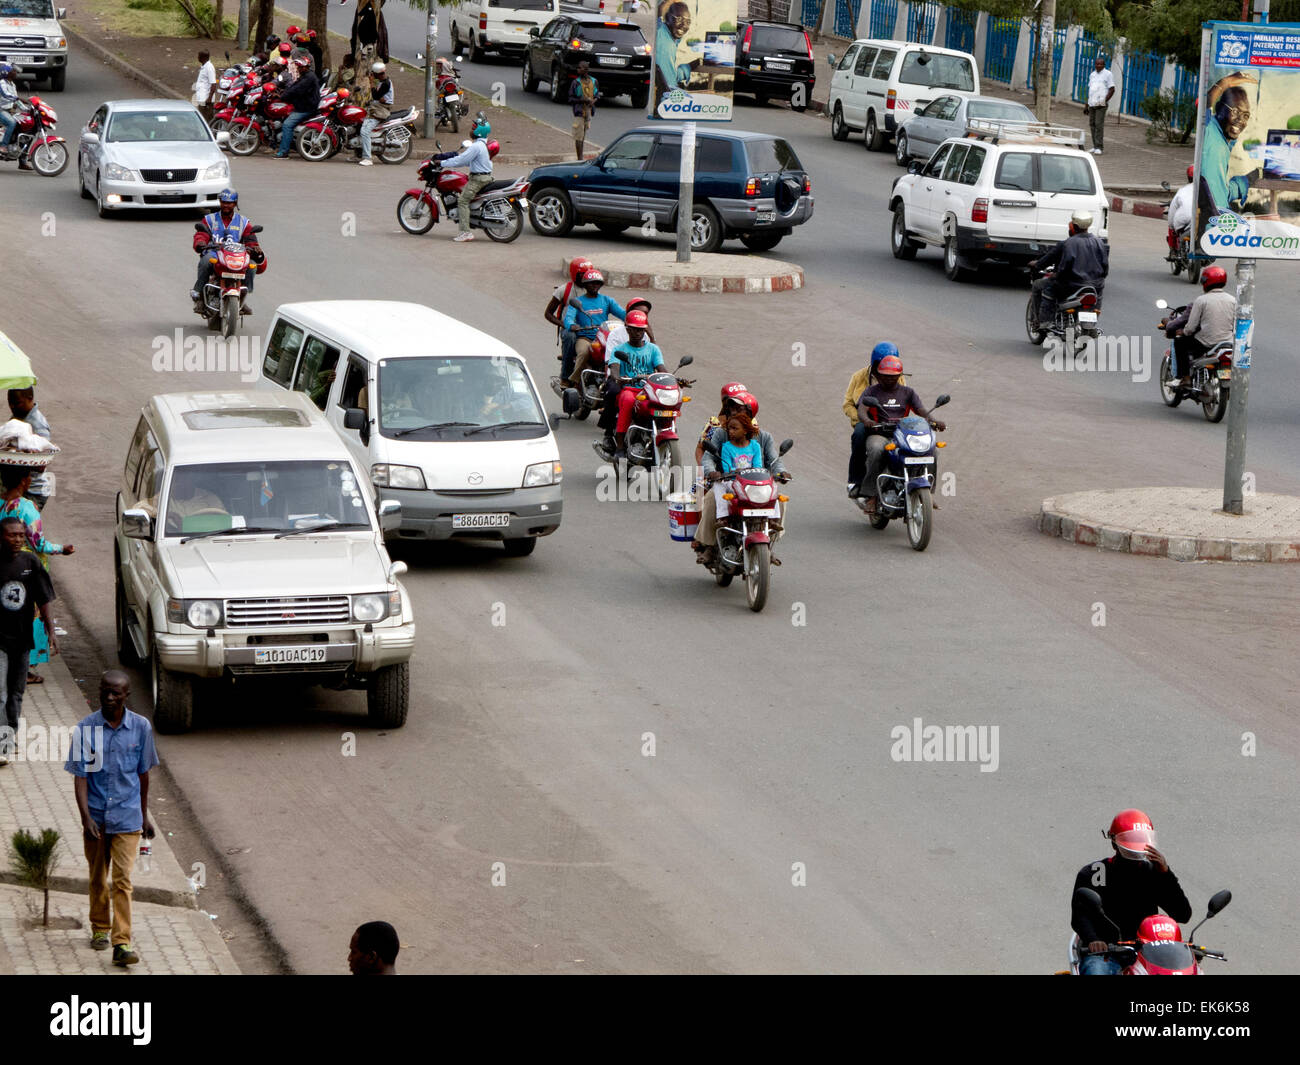 Cars and motorbikes on the main paved road in the town of Goma, North Kivu province, Democratic Republic of Congo ( DRC ), Africa Stock Photo